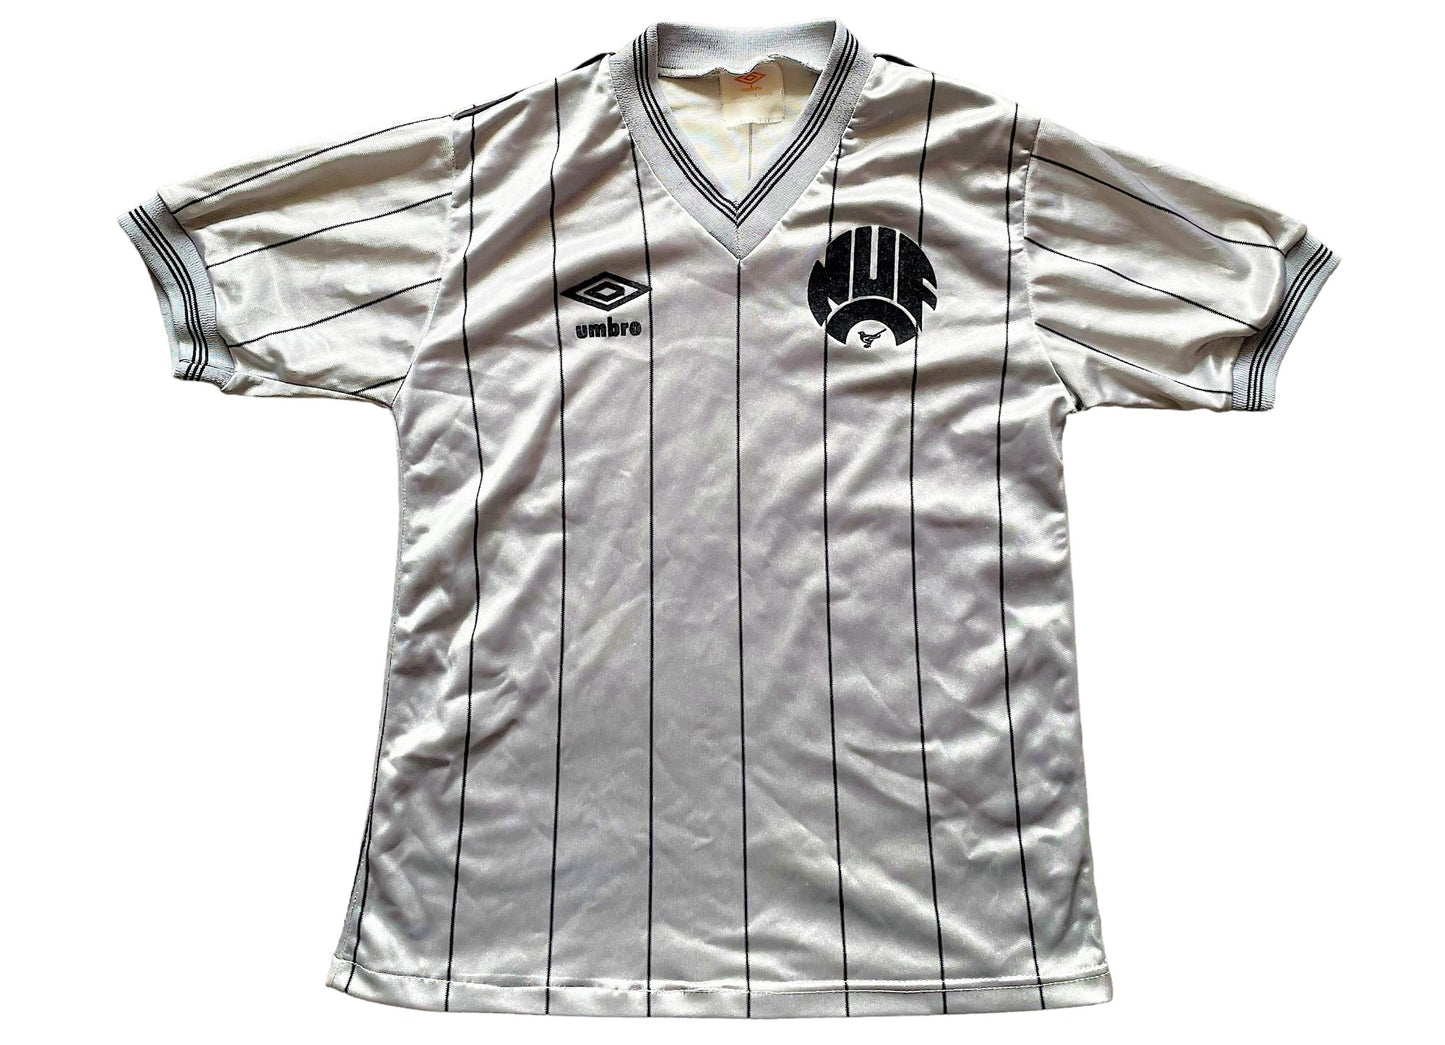 Newcastle 1983 Away Shirt Original (good) Adult XXS/Youths. Height 18 inches.